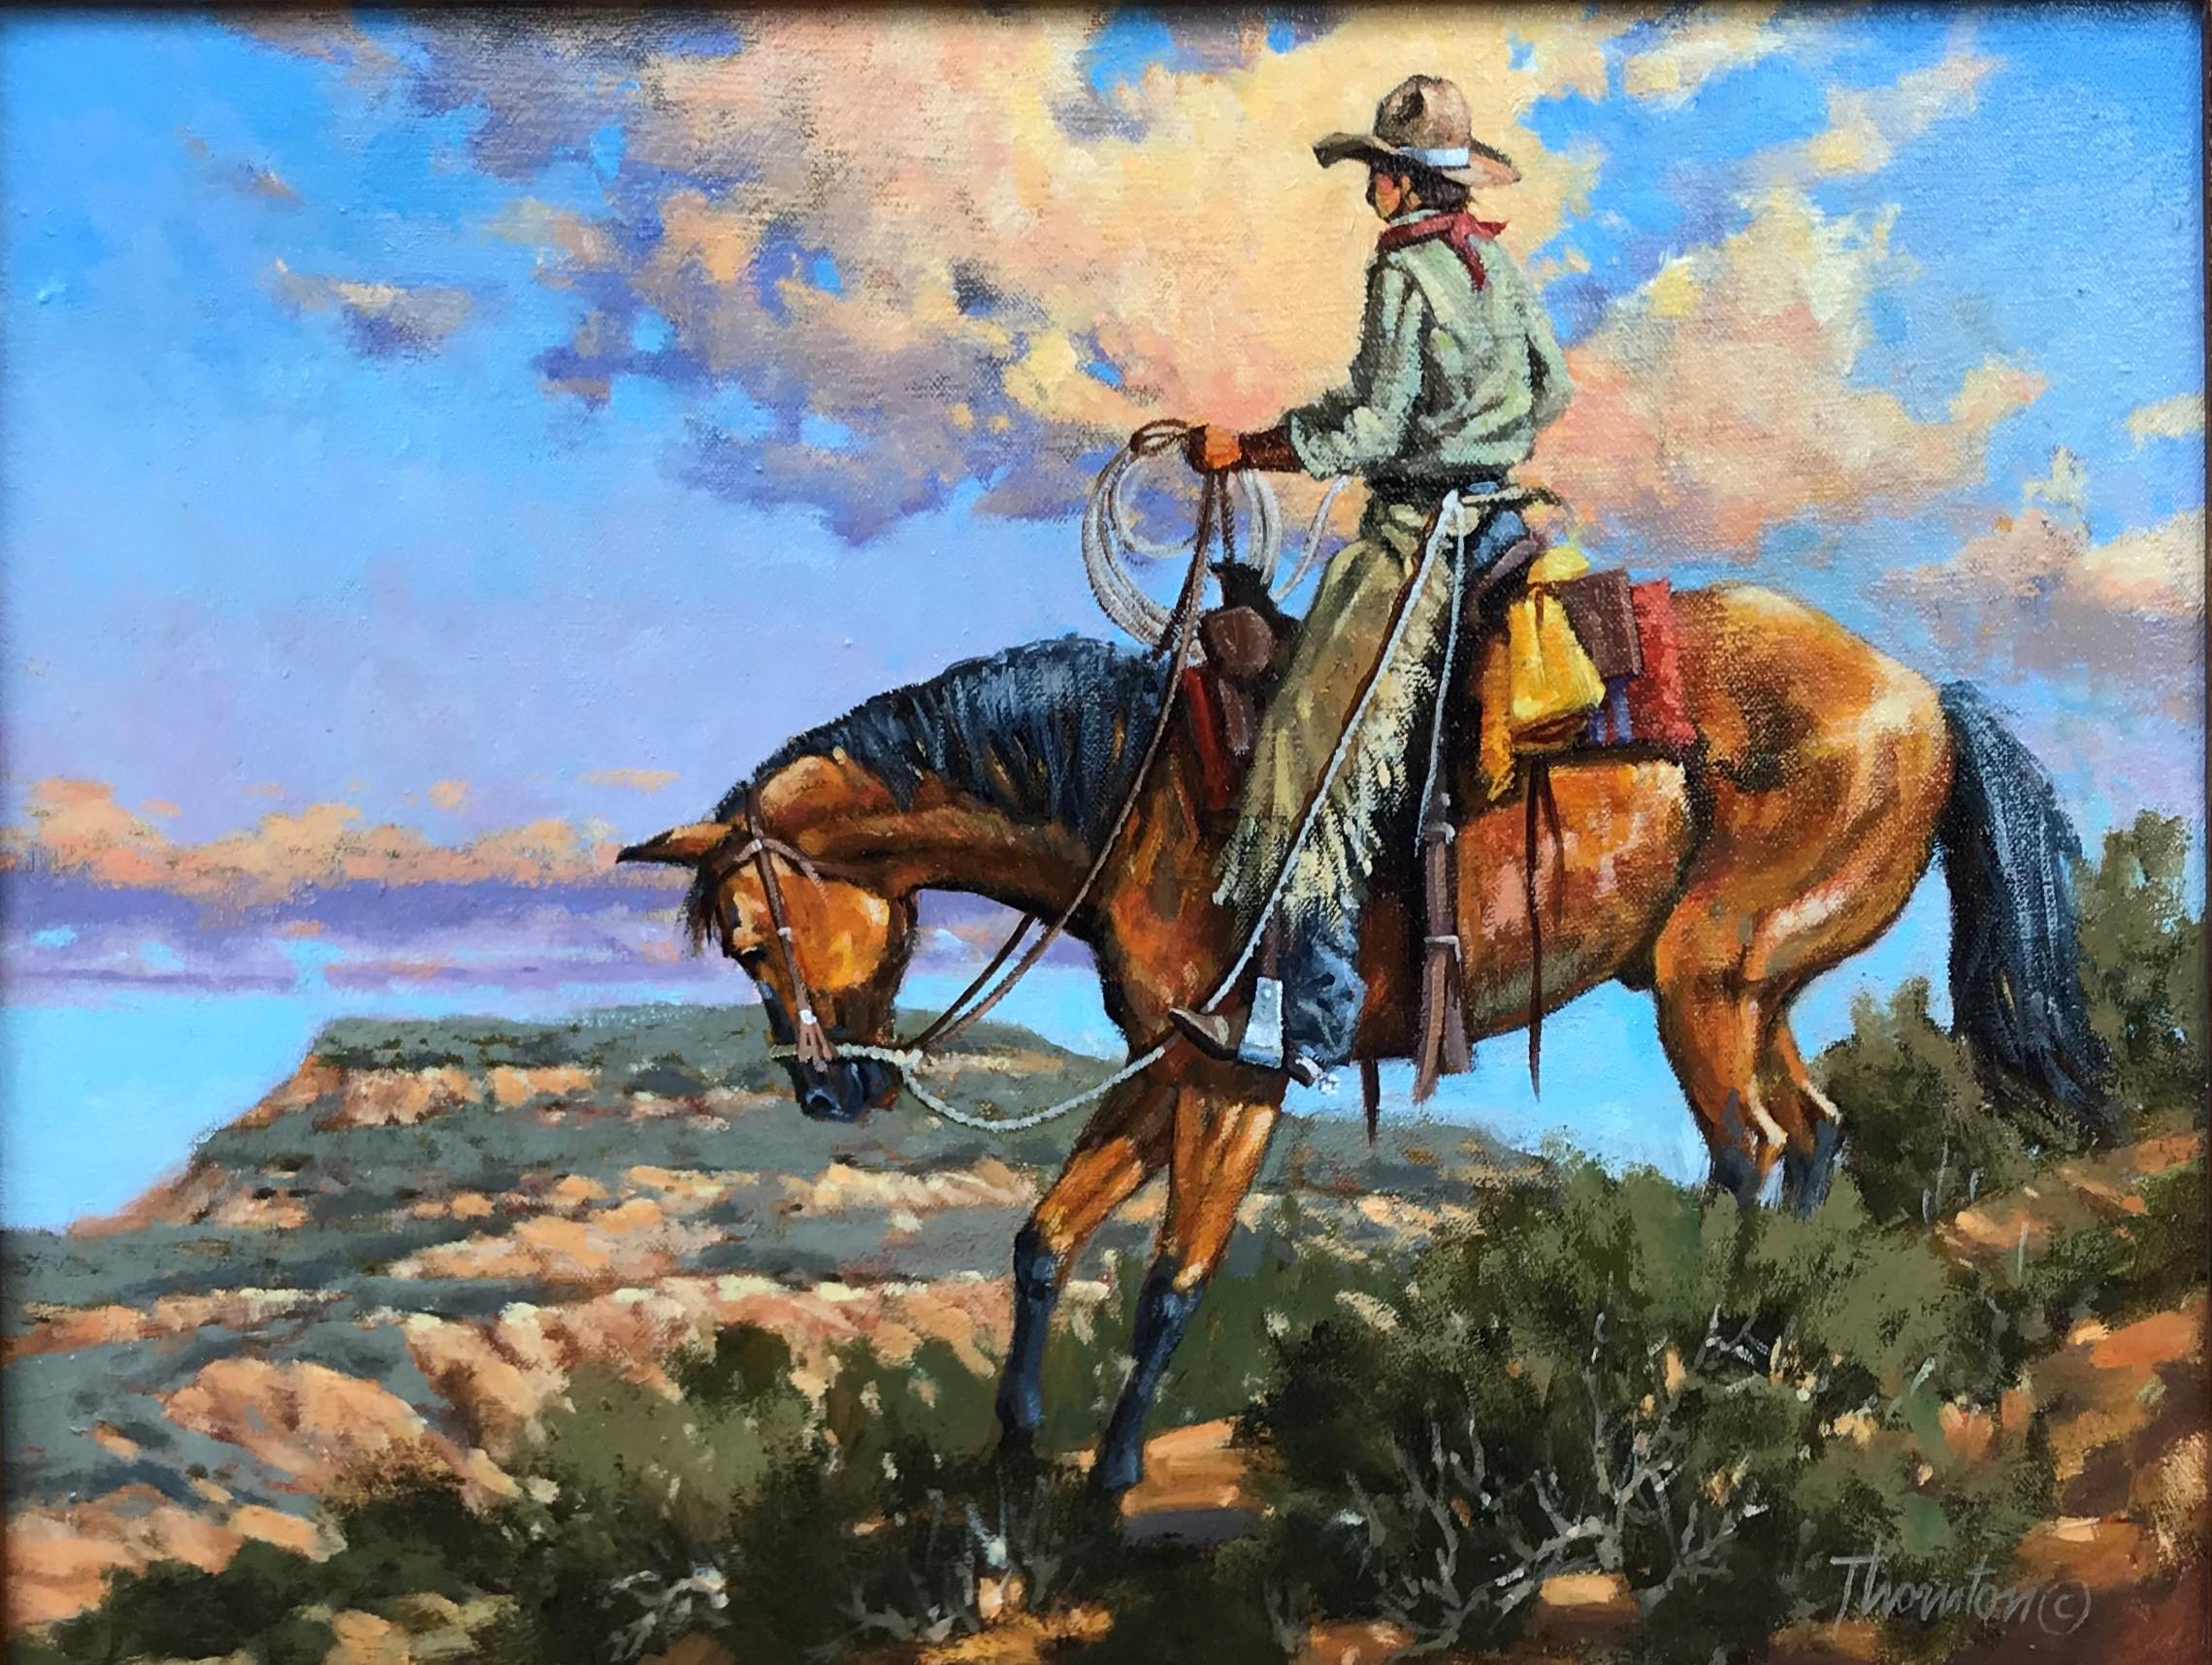 Pickin' His Way Down - Painting by Gary Jack Thornton